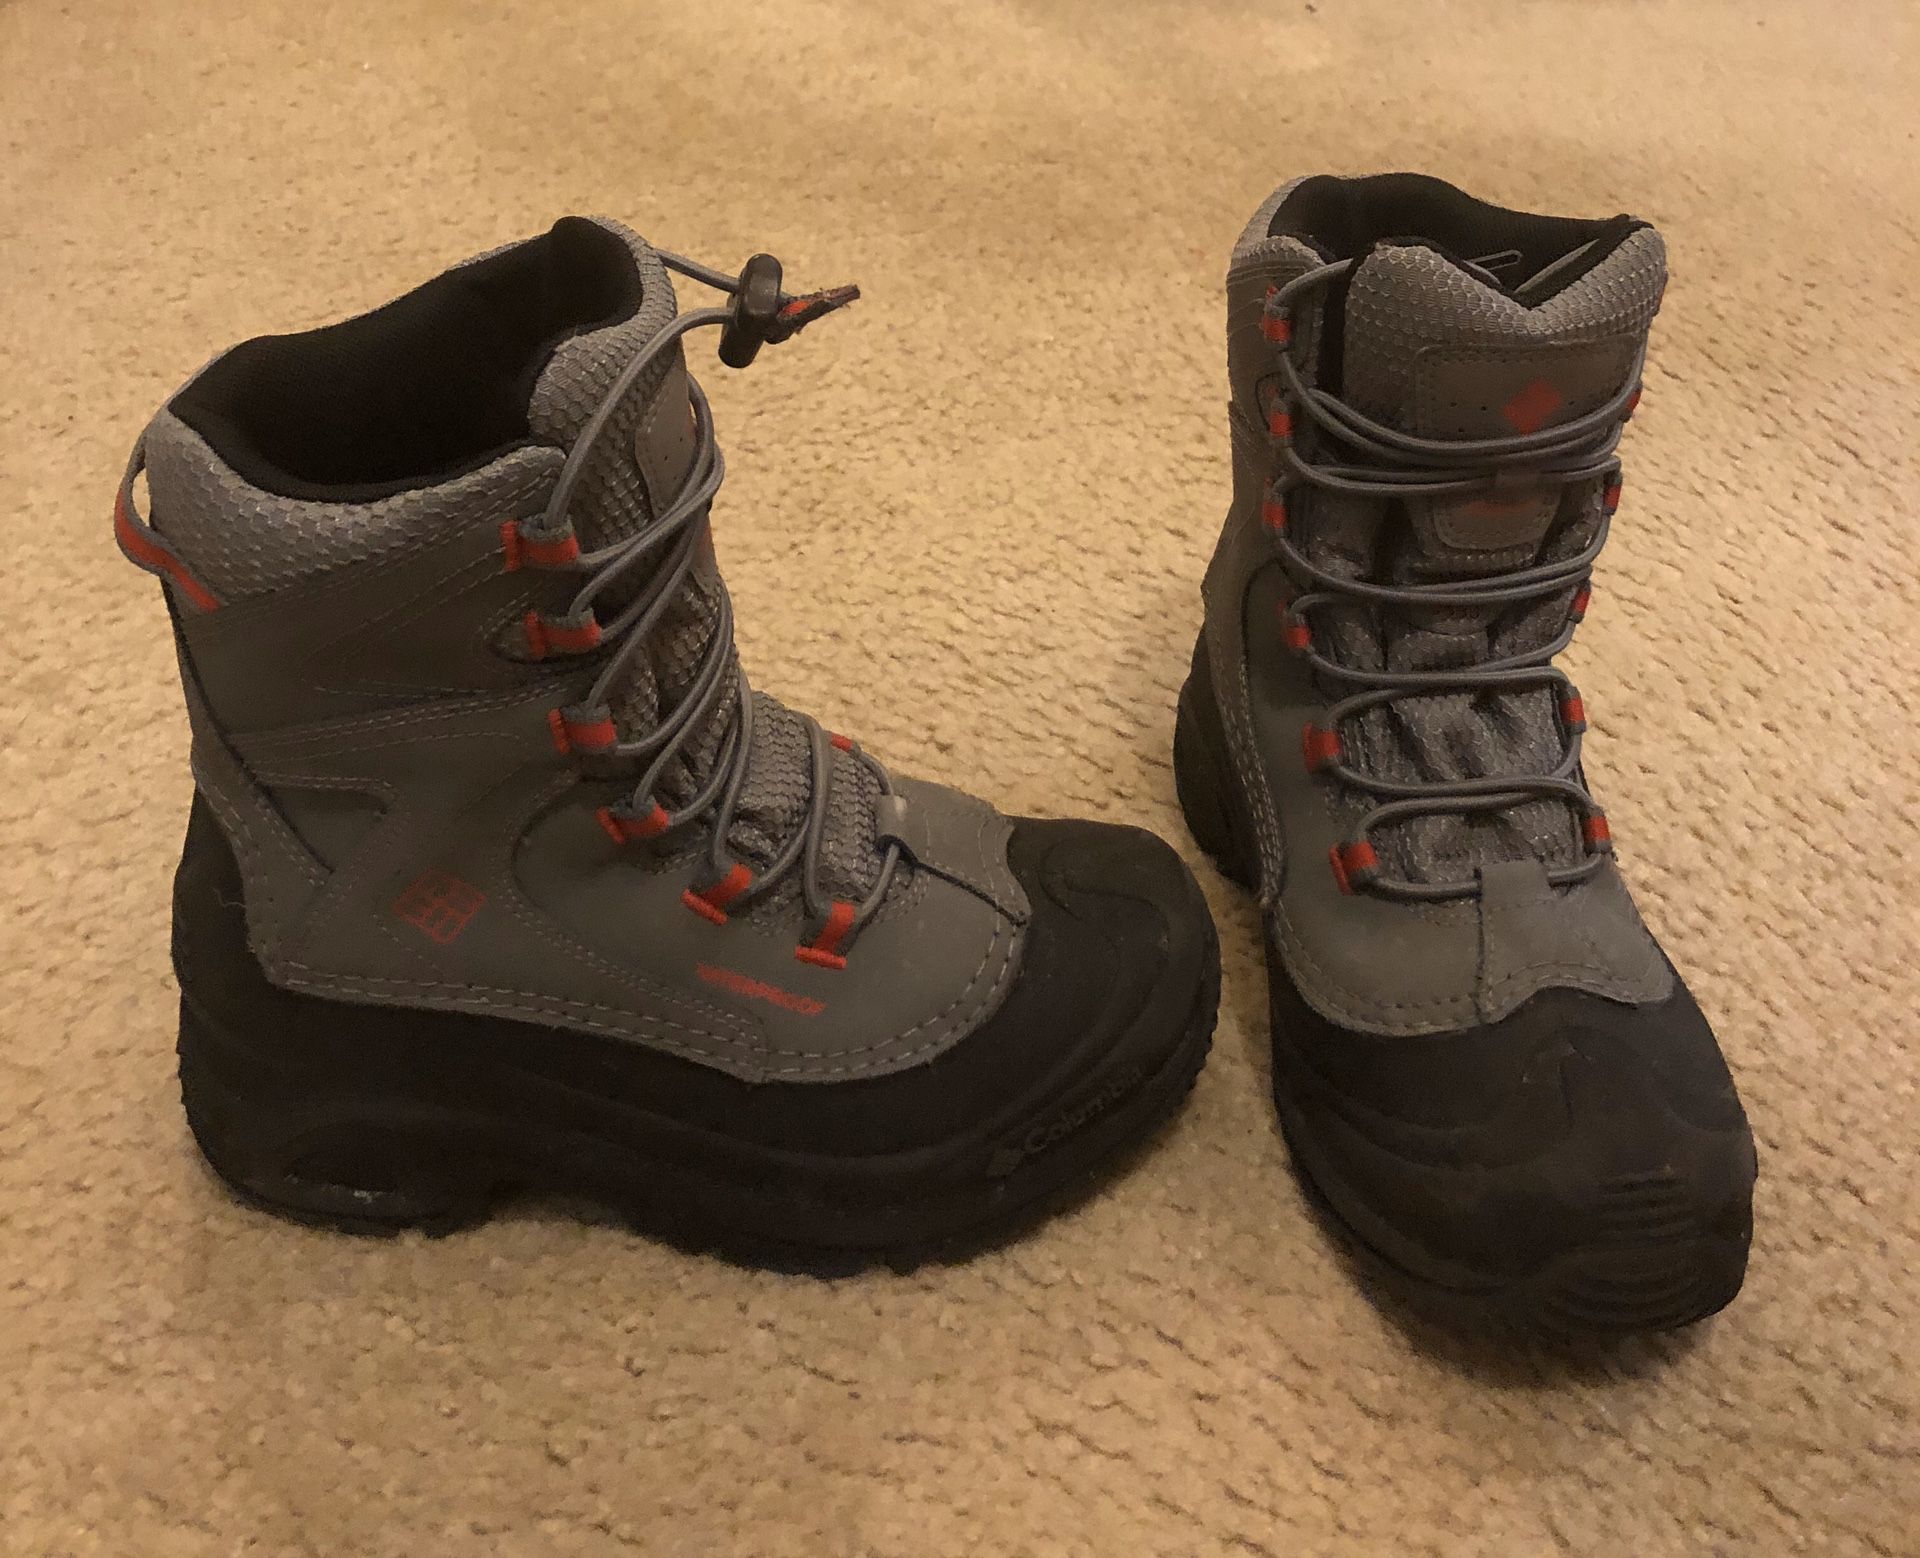 Columbia Waterproof Snow Boots boys size 2